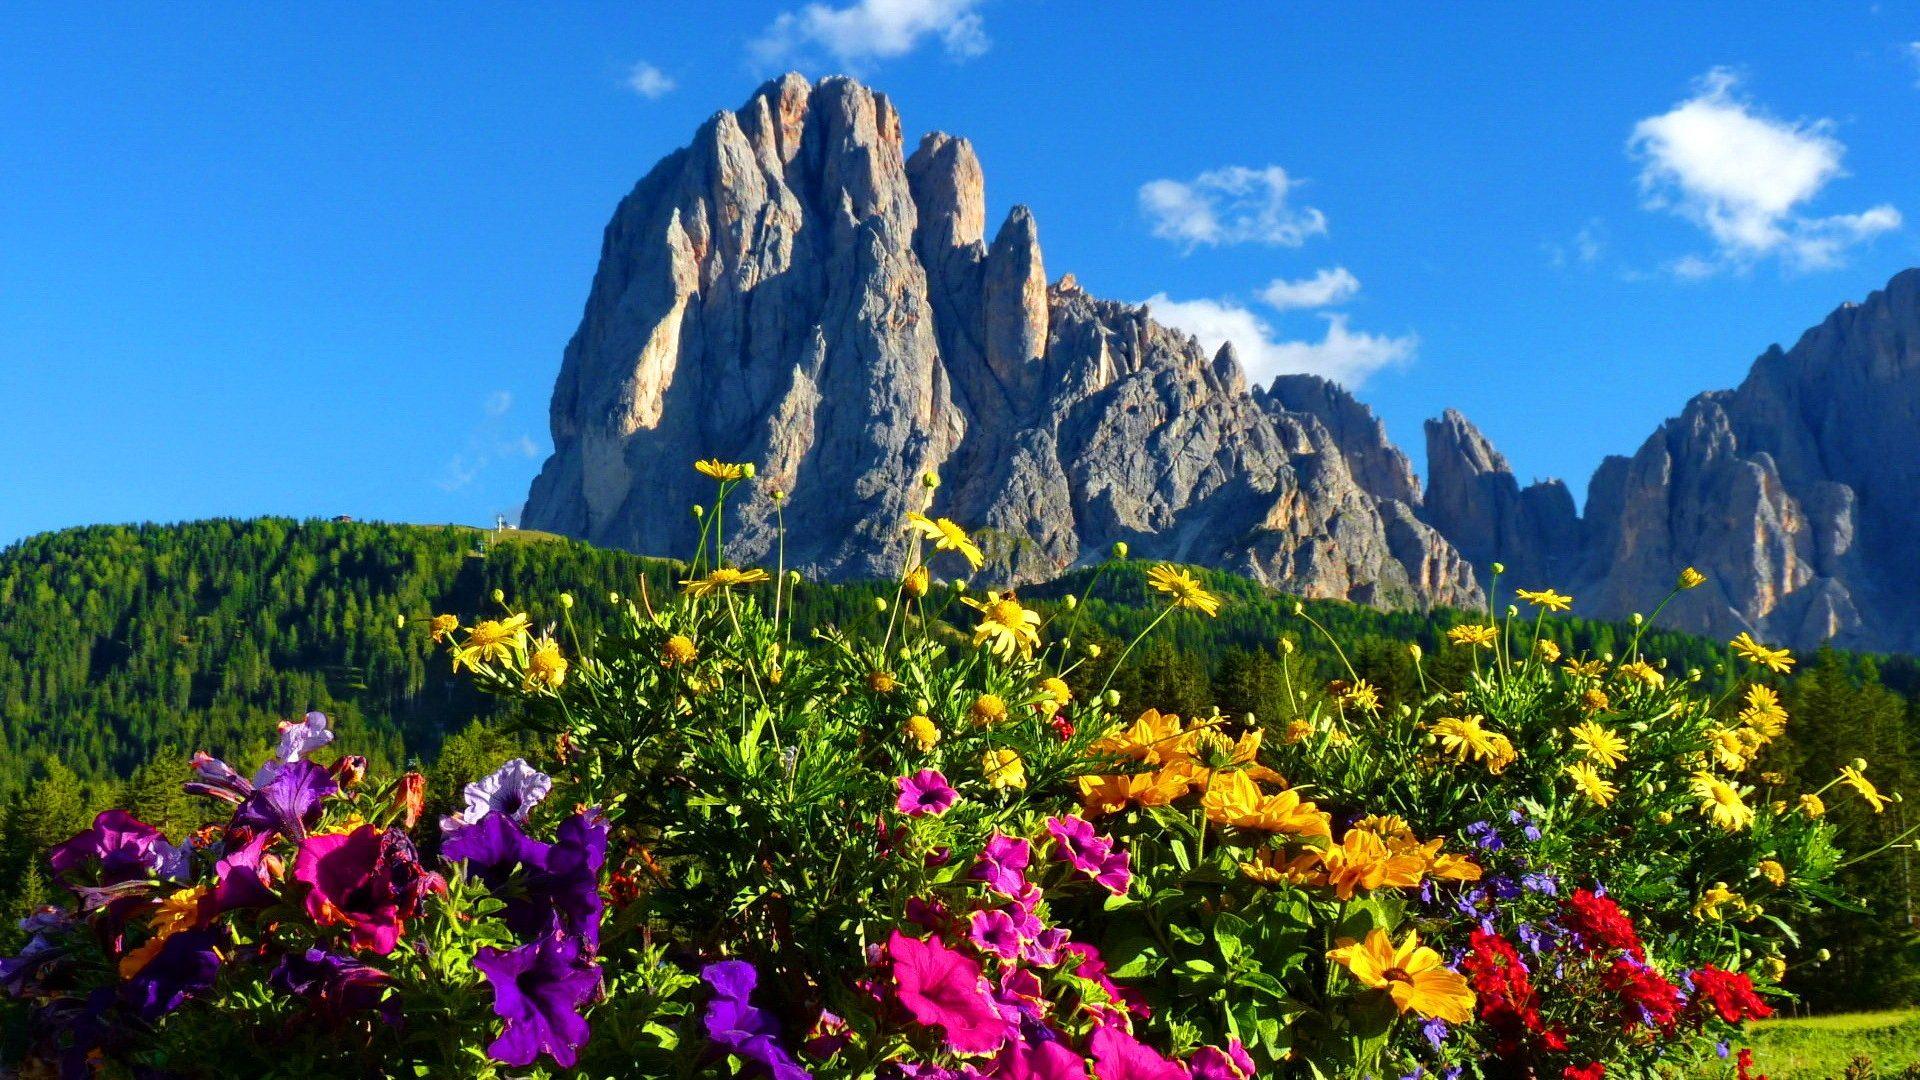 Mountains: Dolomites Italy Colorful Grass Mountain Rocks Flowers